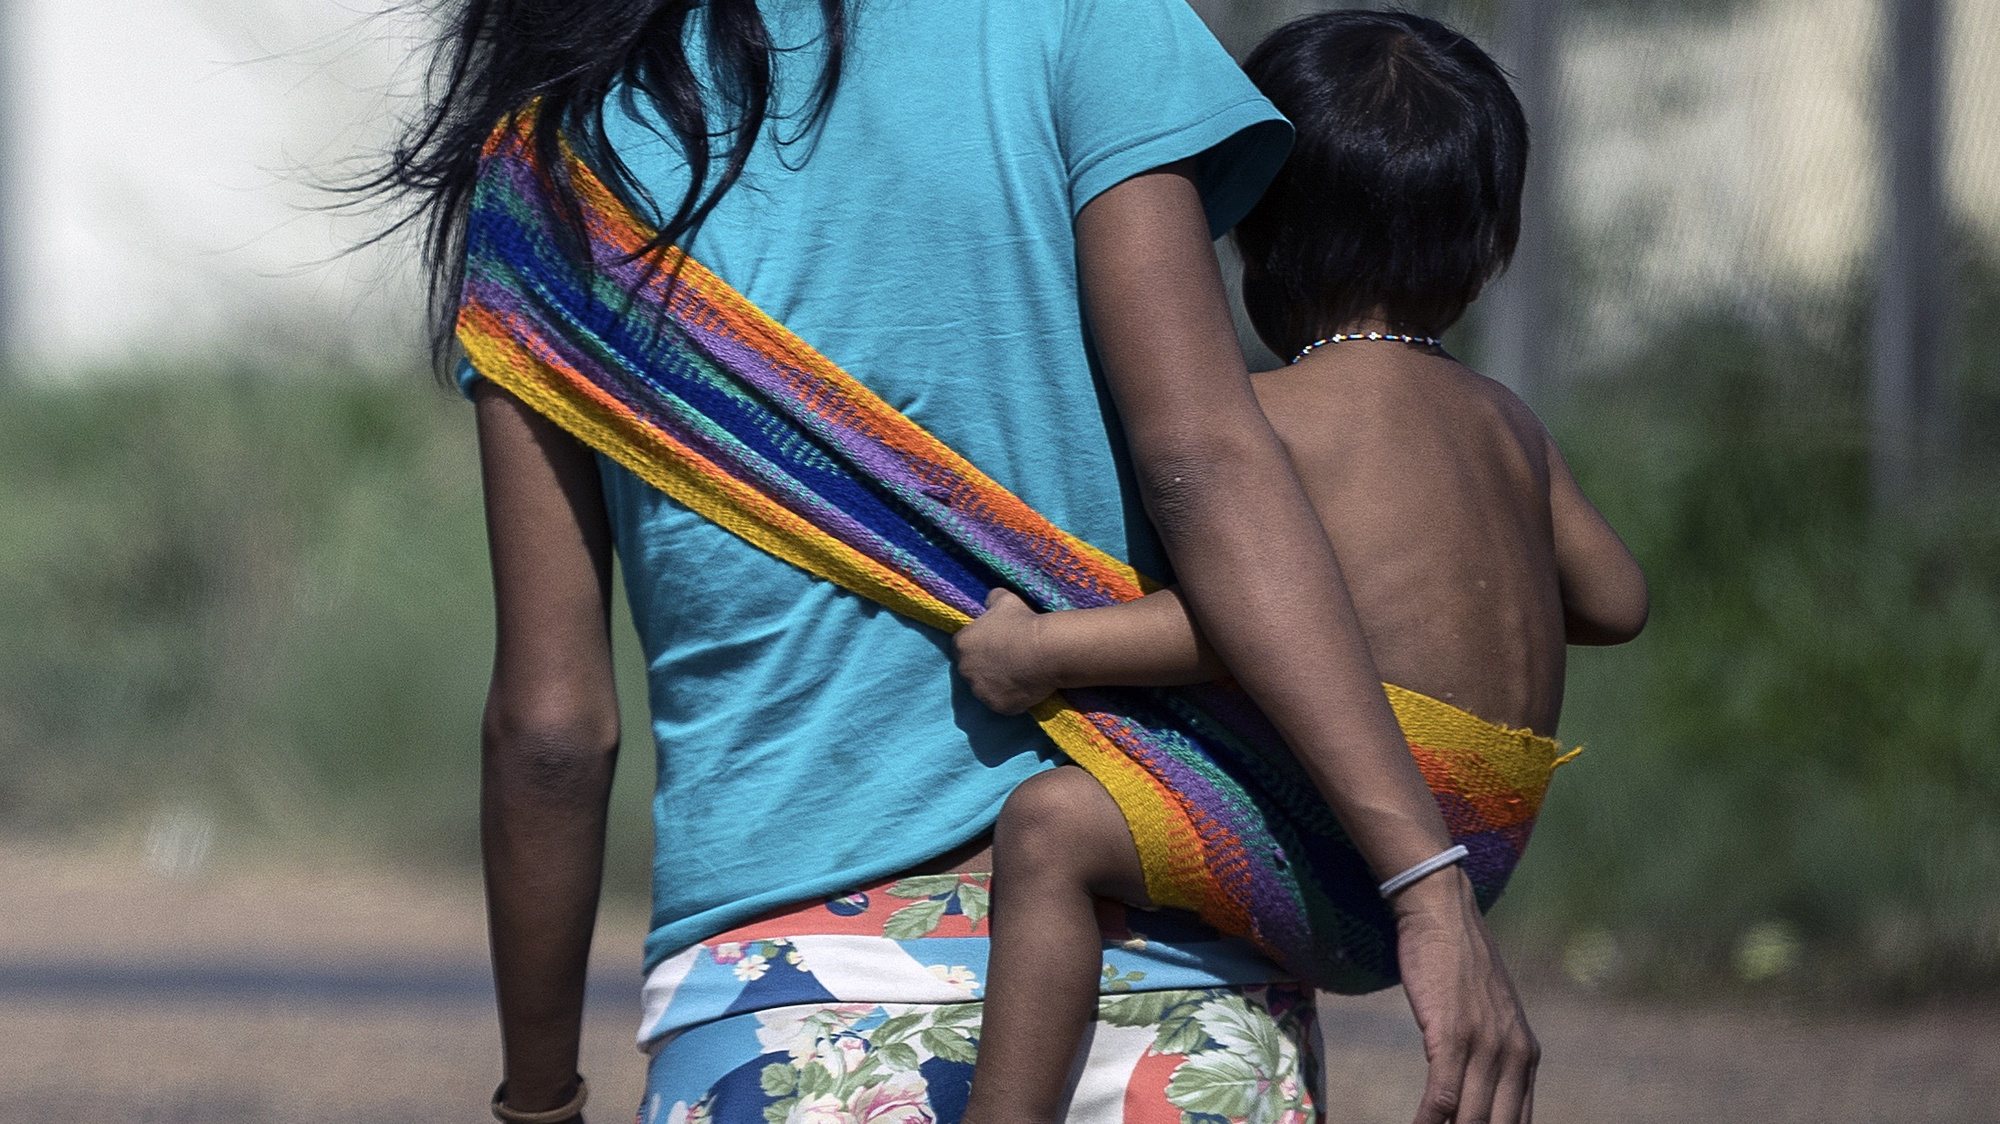 epa10443384 An indigenous Yanomami woman and a baby in a rural area near the Casa de Saude Indigena (CASAI), in Boa Vista, in the Amazonian state of Roraima, Brazil, 01 February 2023. Hundreds of Yanomami are in the capital of the state of Roraima due to the health crisis that thrives on their lands due to the presence of illegal mining. The Brazilian government decreed a state of health emergency on Yanomami land ten days ago, when President Lula visited the area to verify the situation of abandonment in which the indigenous people of that region live. About 21,000 Yanomami, out of a population of 27,000, have been infected with malaria, many suffer from heavy metal poisoning used by illegal miners, and a large number suffer from malnutrition.  EPA/Raphael Alves